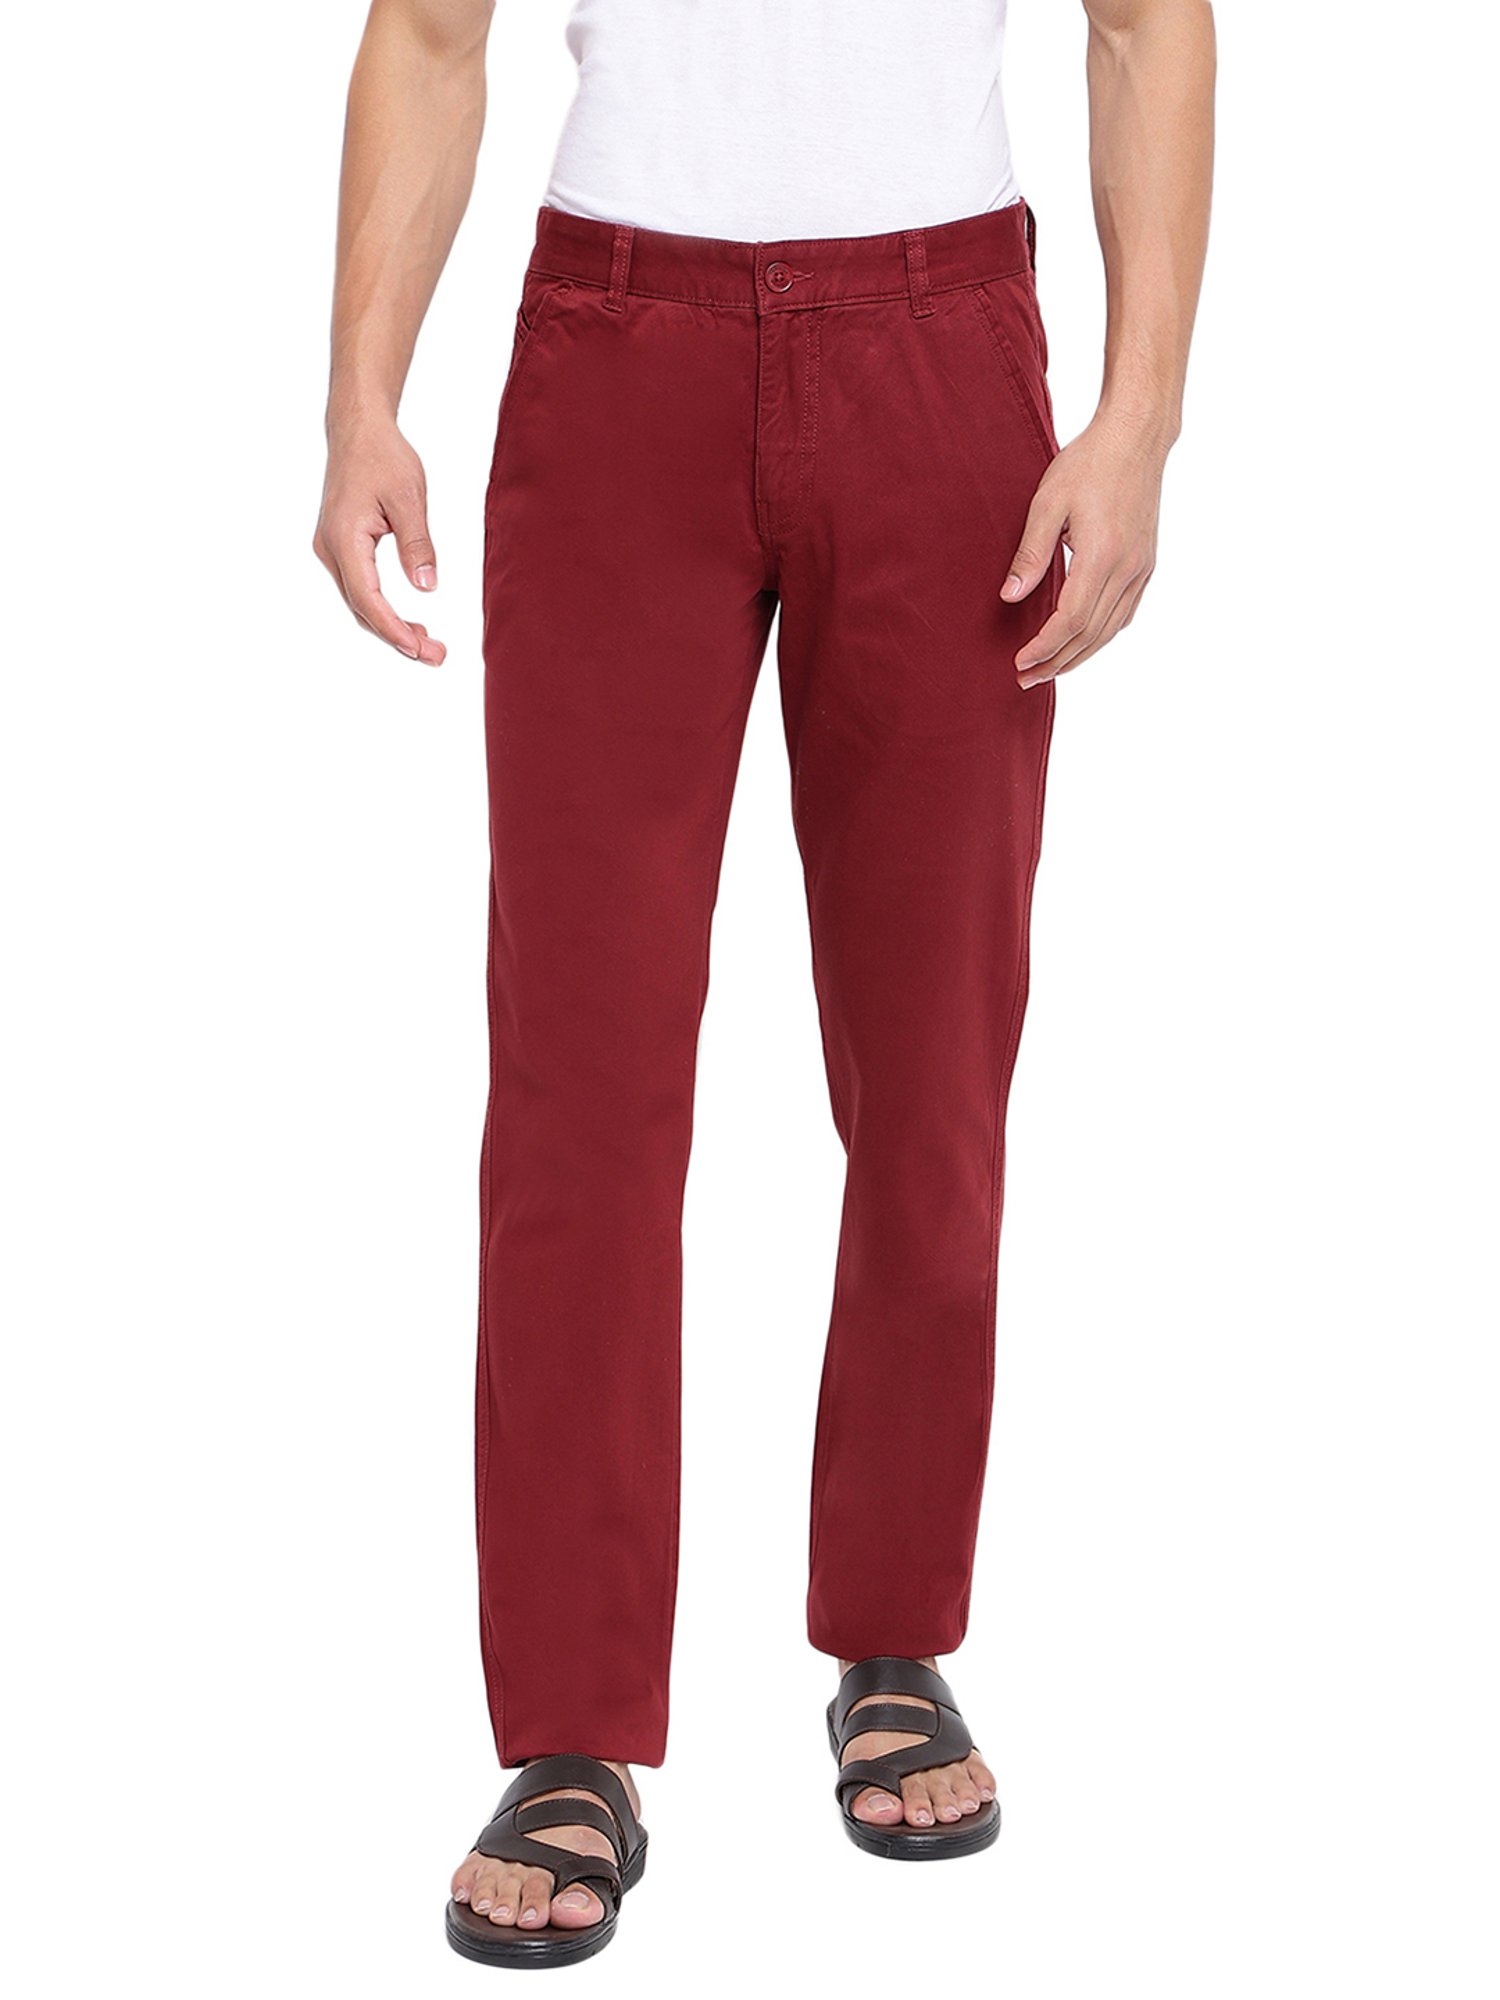 Buy GOGentlemens Outfitters Mens Skinny Fit Burgundy Coloured Solid  Cotton Stretch Pants for Leisure Wear  3036 at Amazonin